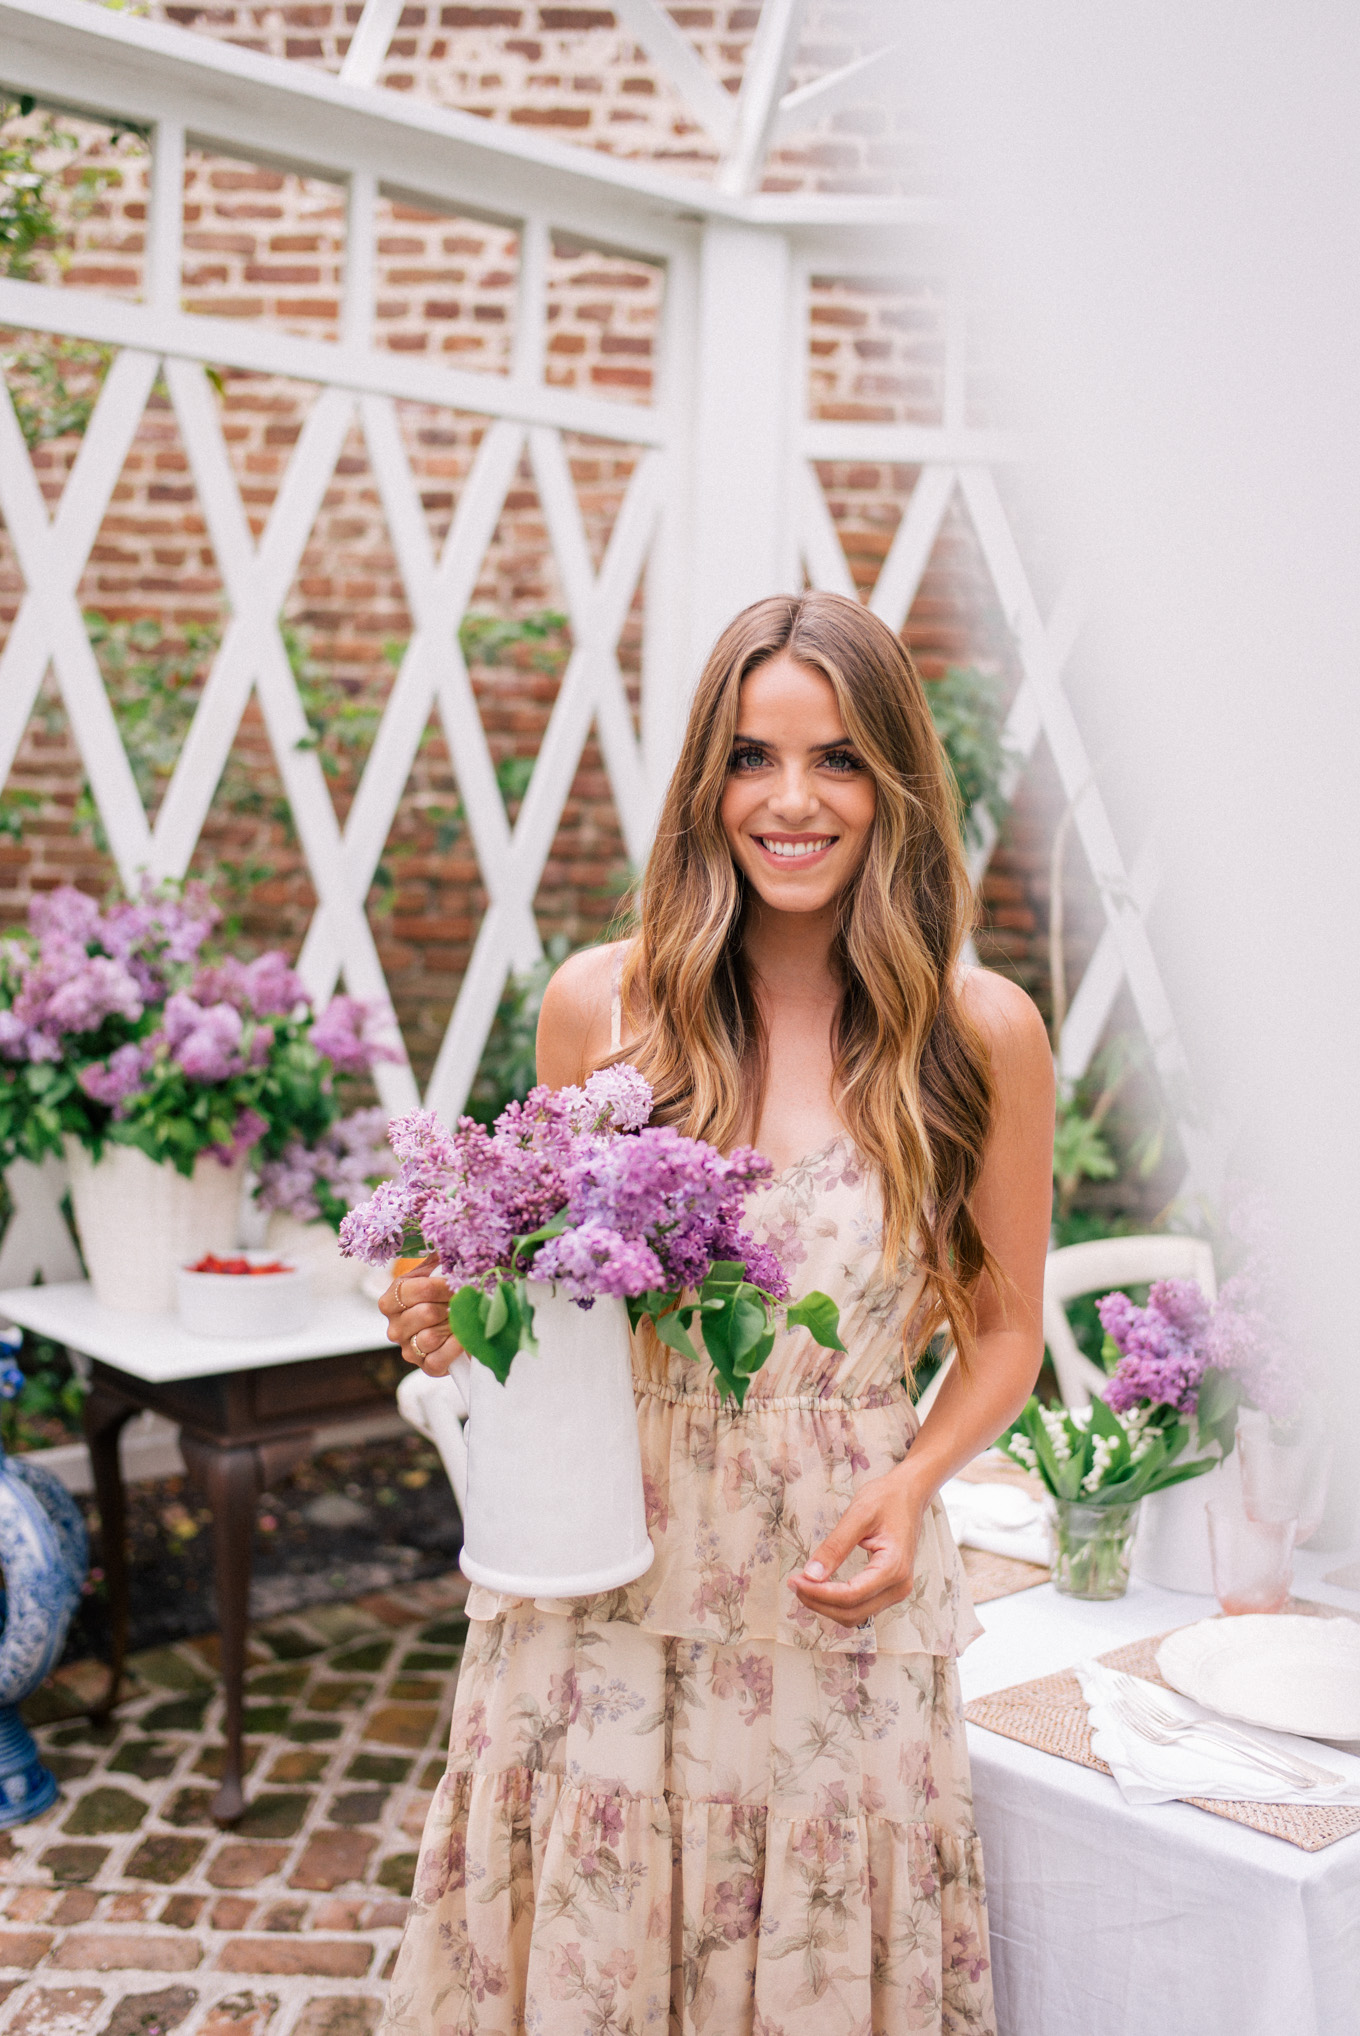 Gal Meets Glam Mother's Day Spring Garden Tablescape